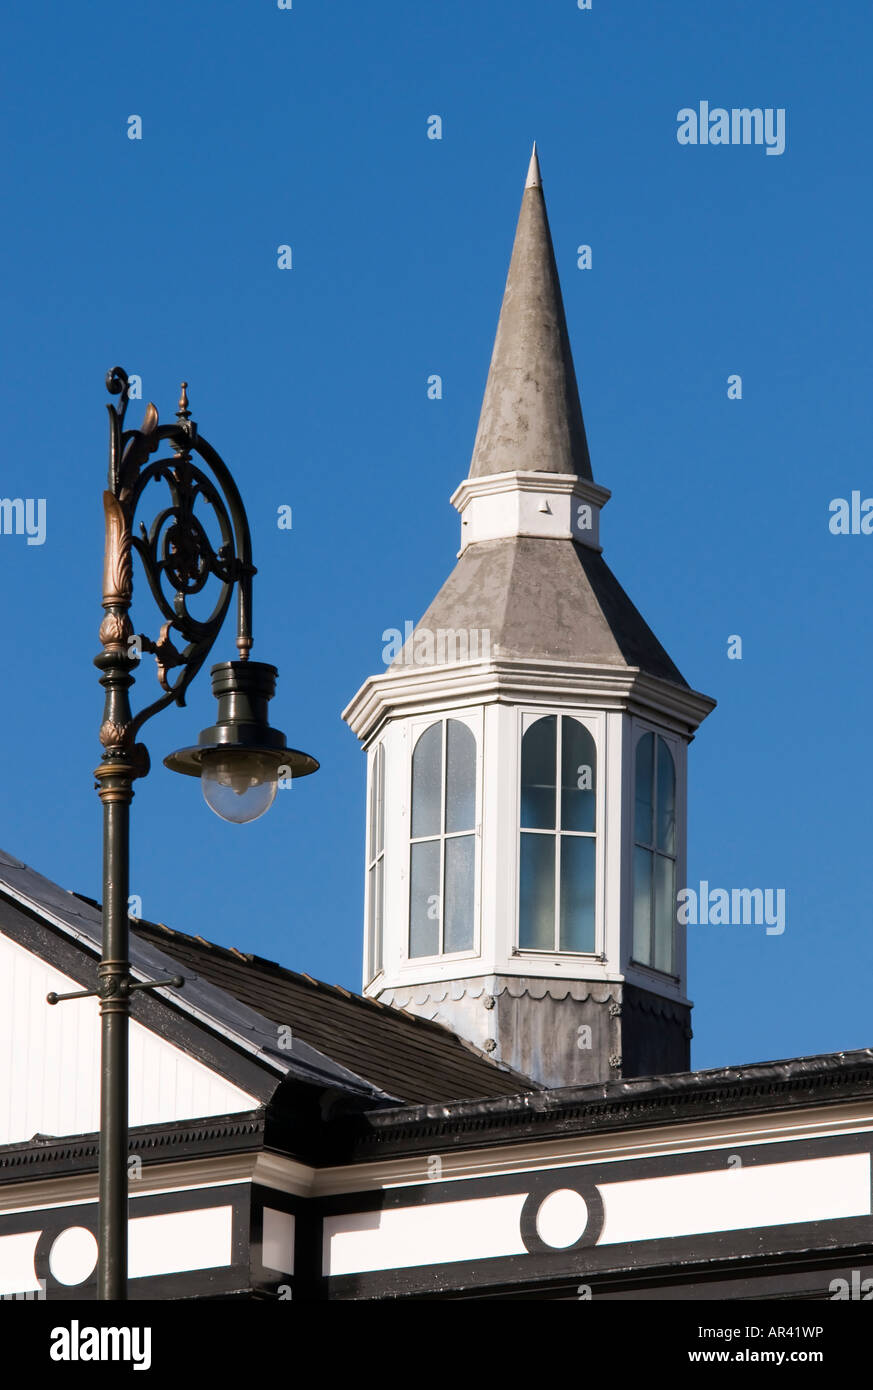 Victorian lamp post and lead covered attic spire on the conservatory adjoining the Opera House in Buxton 'Great Britain' Stock Photo